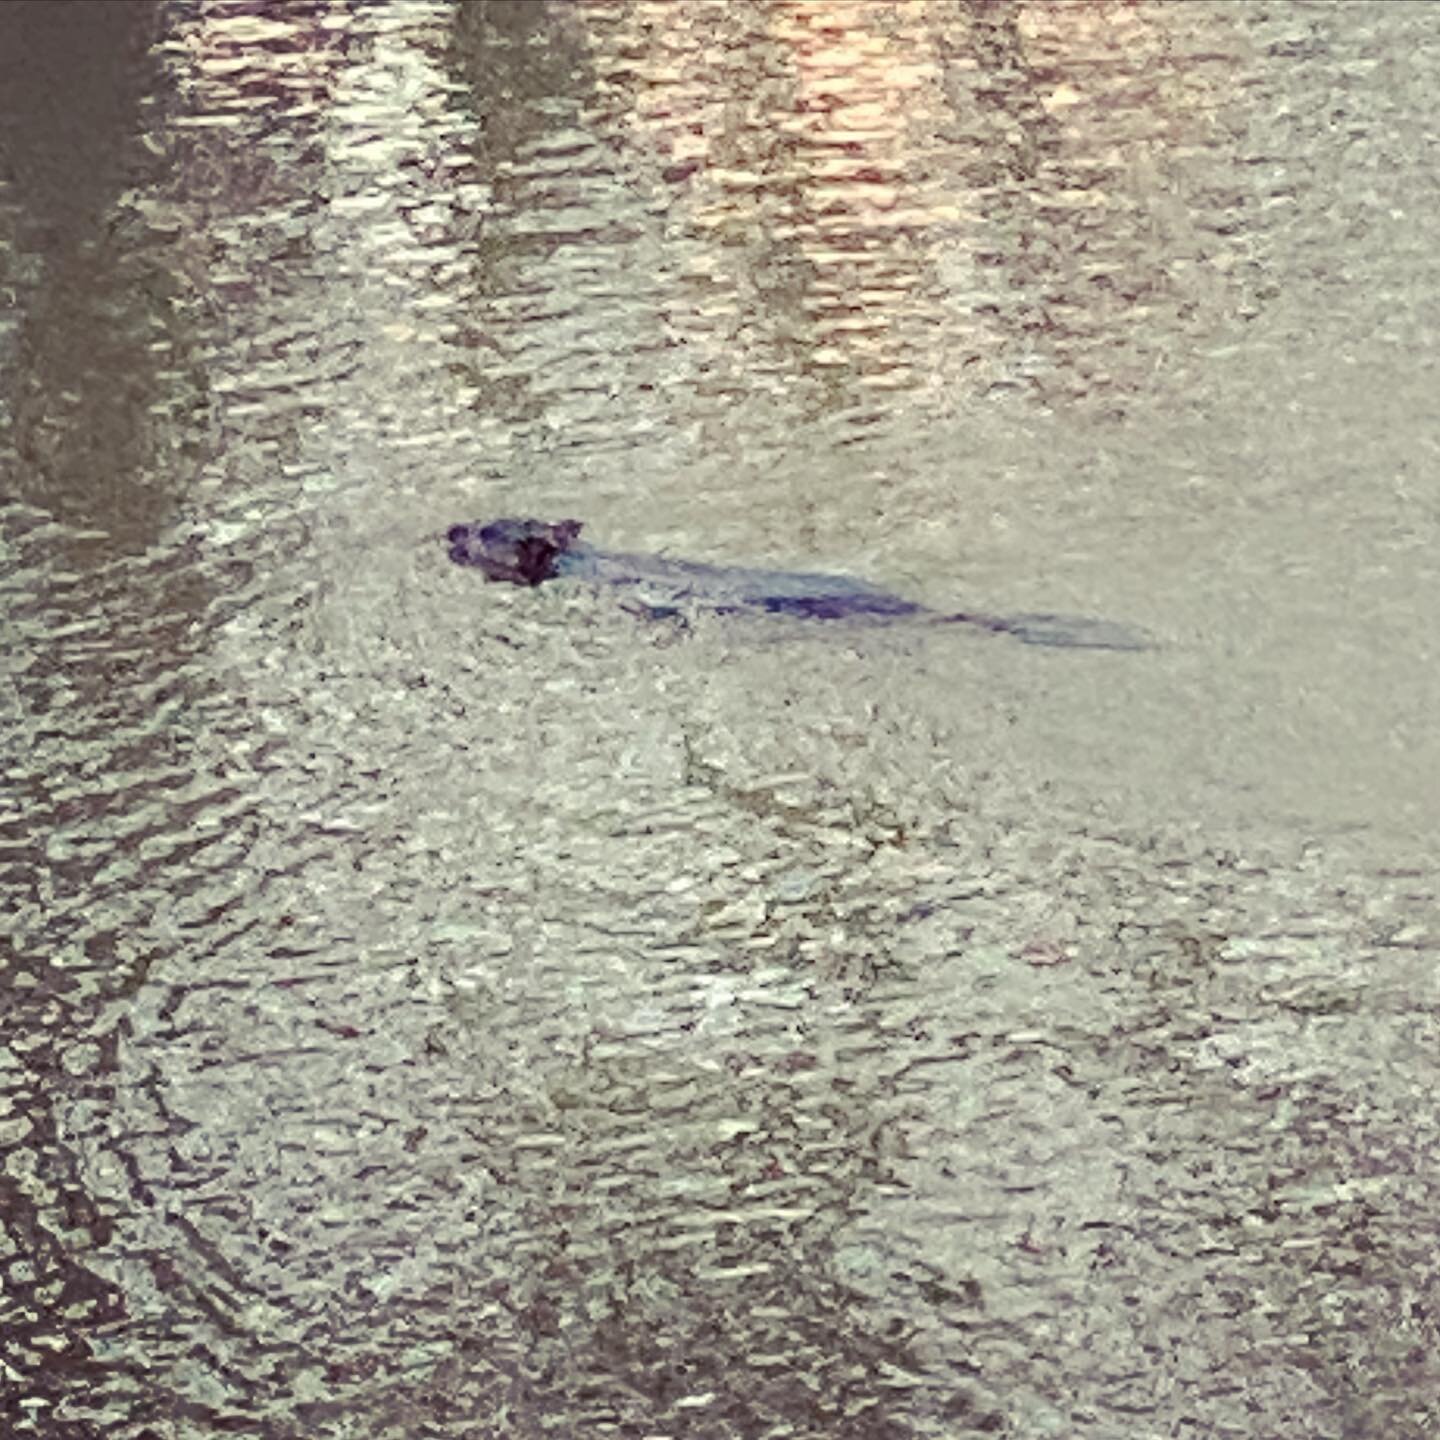 We had a visitor to our pond 🦫 Wouldn&rsquo;t mind if this cute little beaver decided to take up residence at Haley Farm! 

#wildlife #pond #farmlife